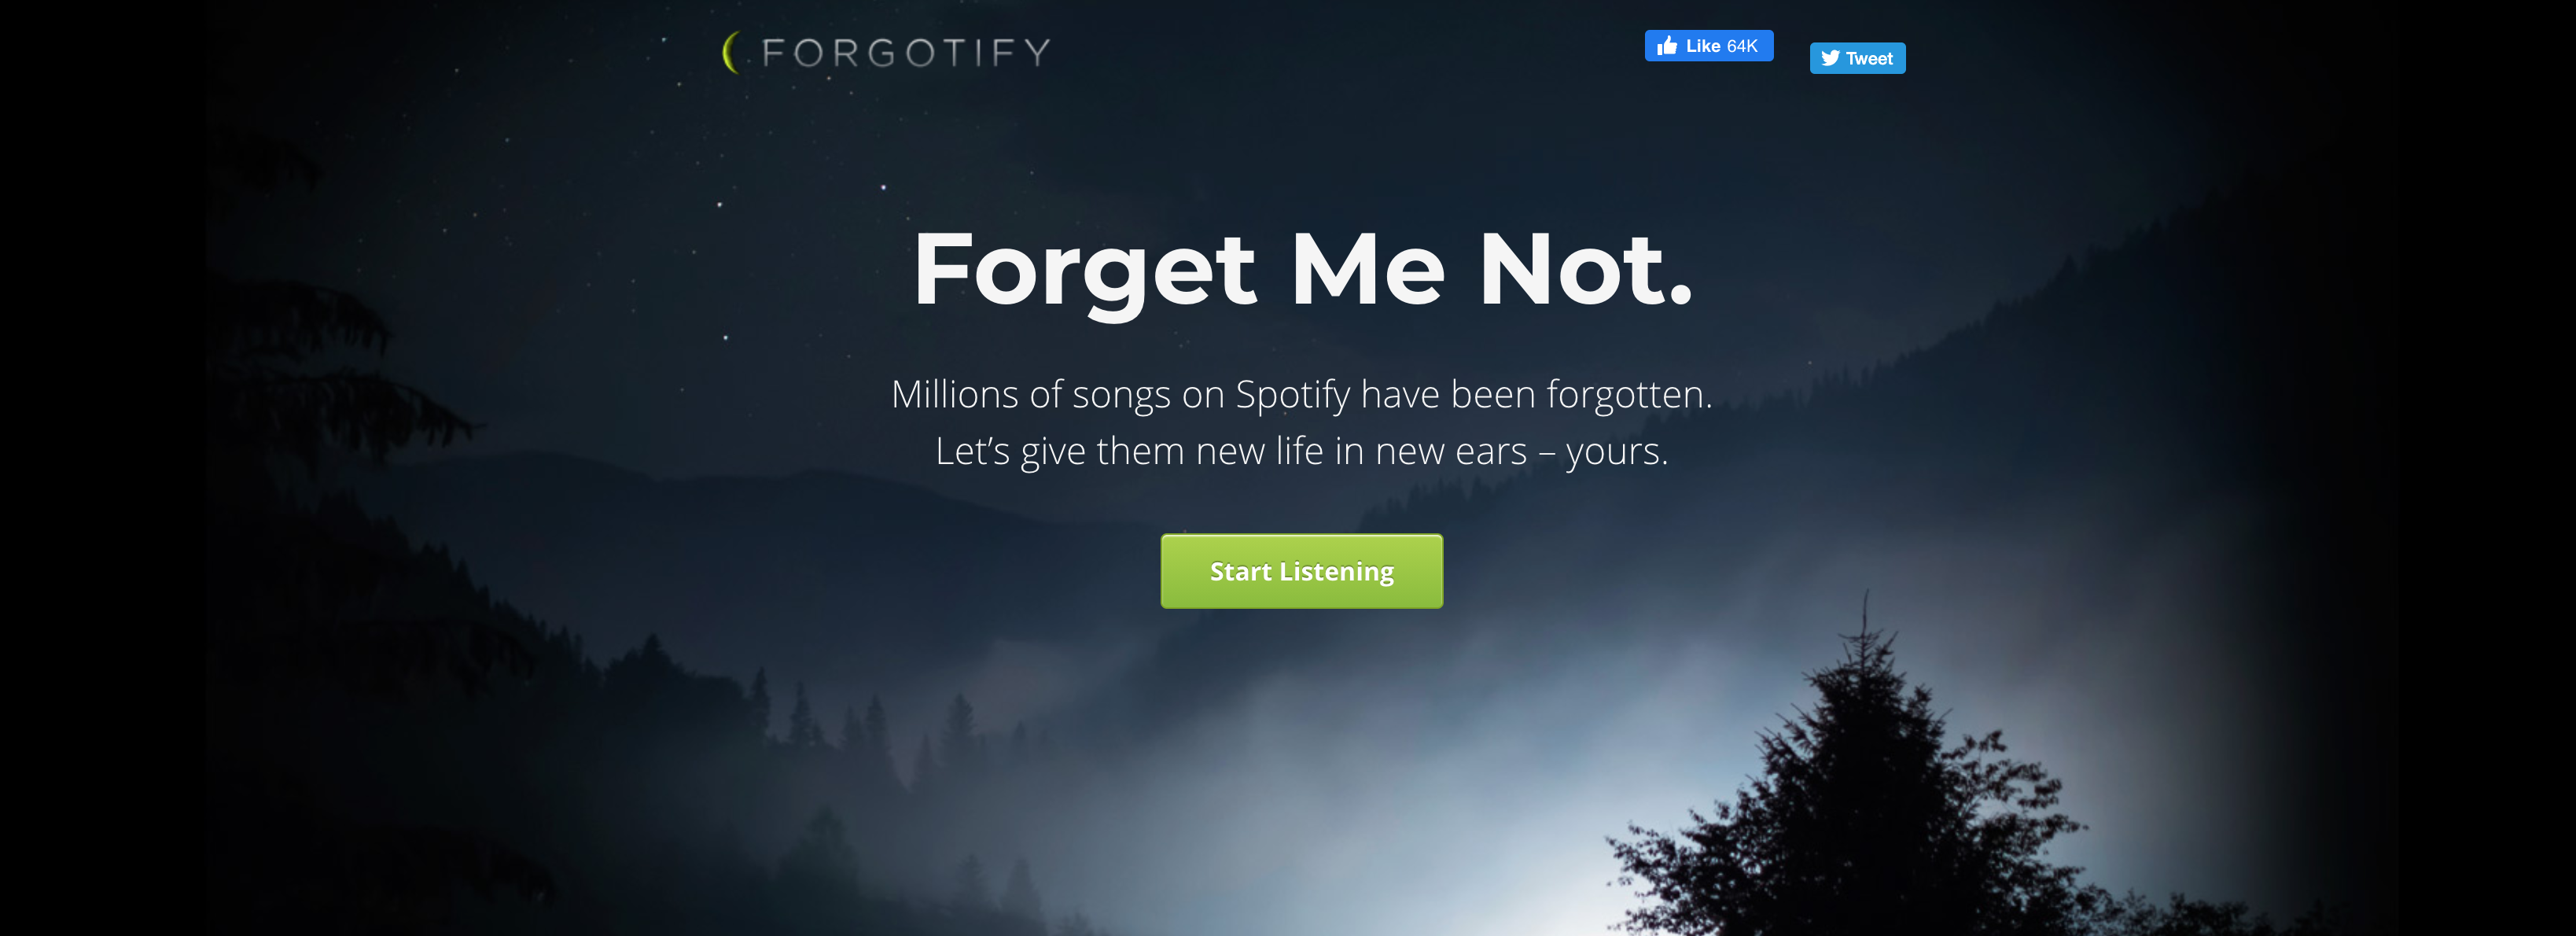 Forgotify Brings The Unheard Music Of Spotify To Your Ears